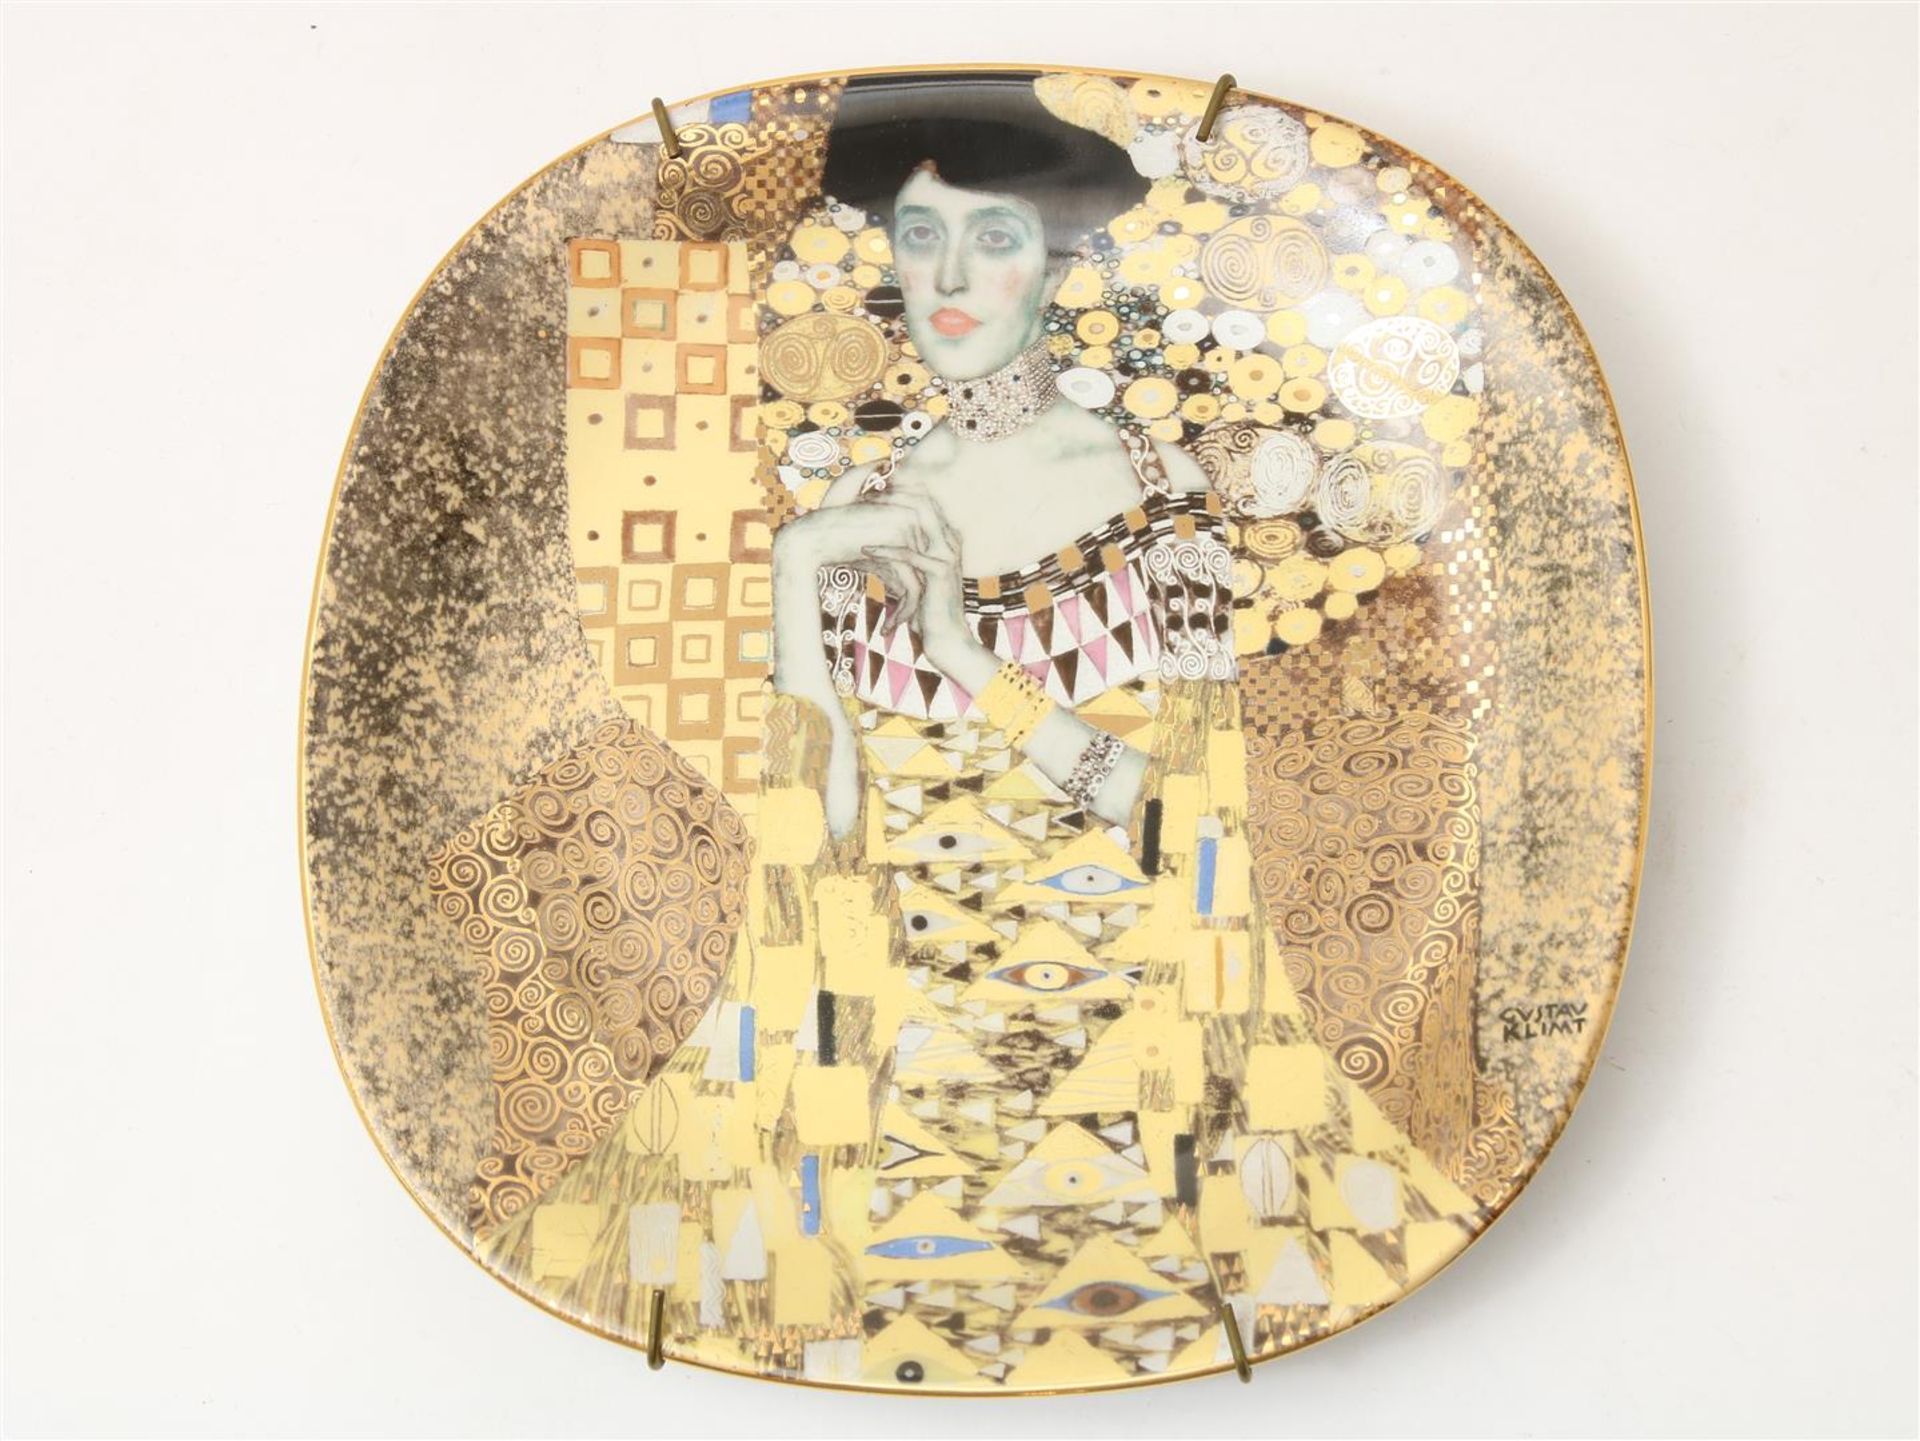 Series of 7 plates with images of the painter Gustav Klimt, Lilien porzellan, "Phantastic - Image 13 of 18